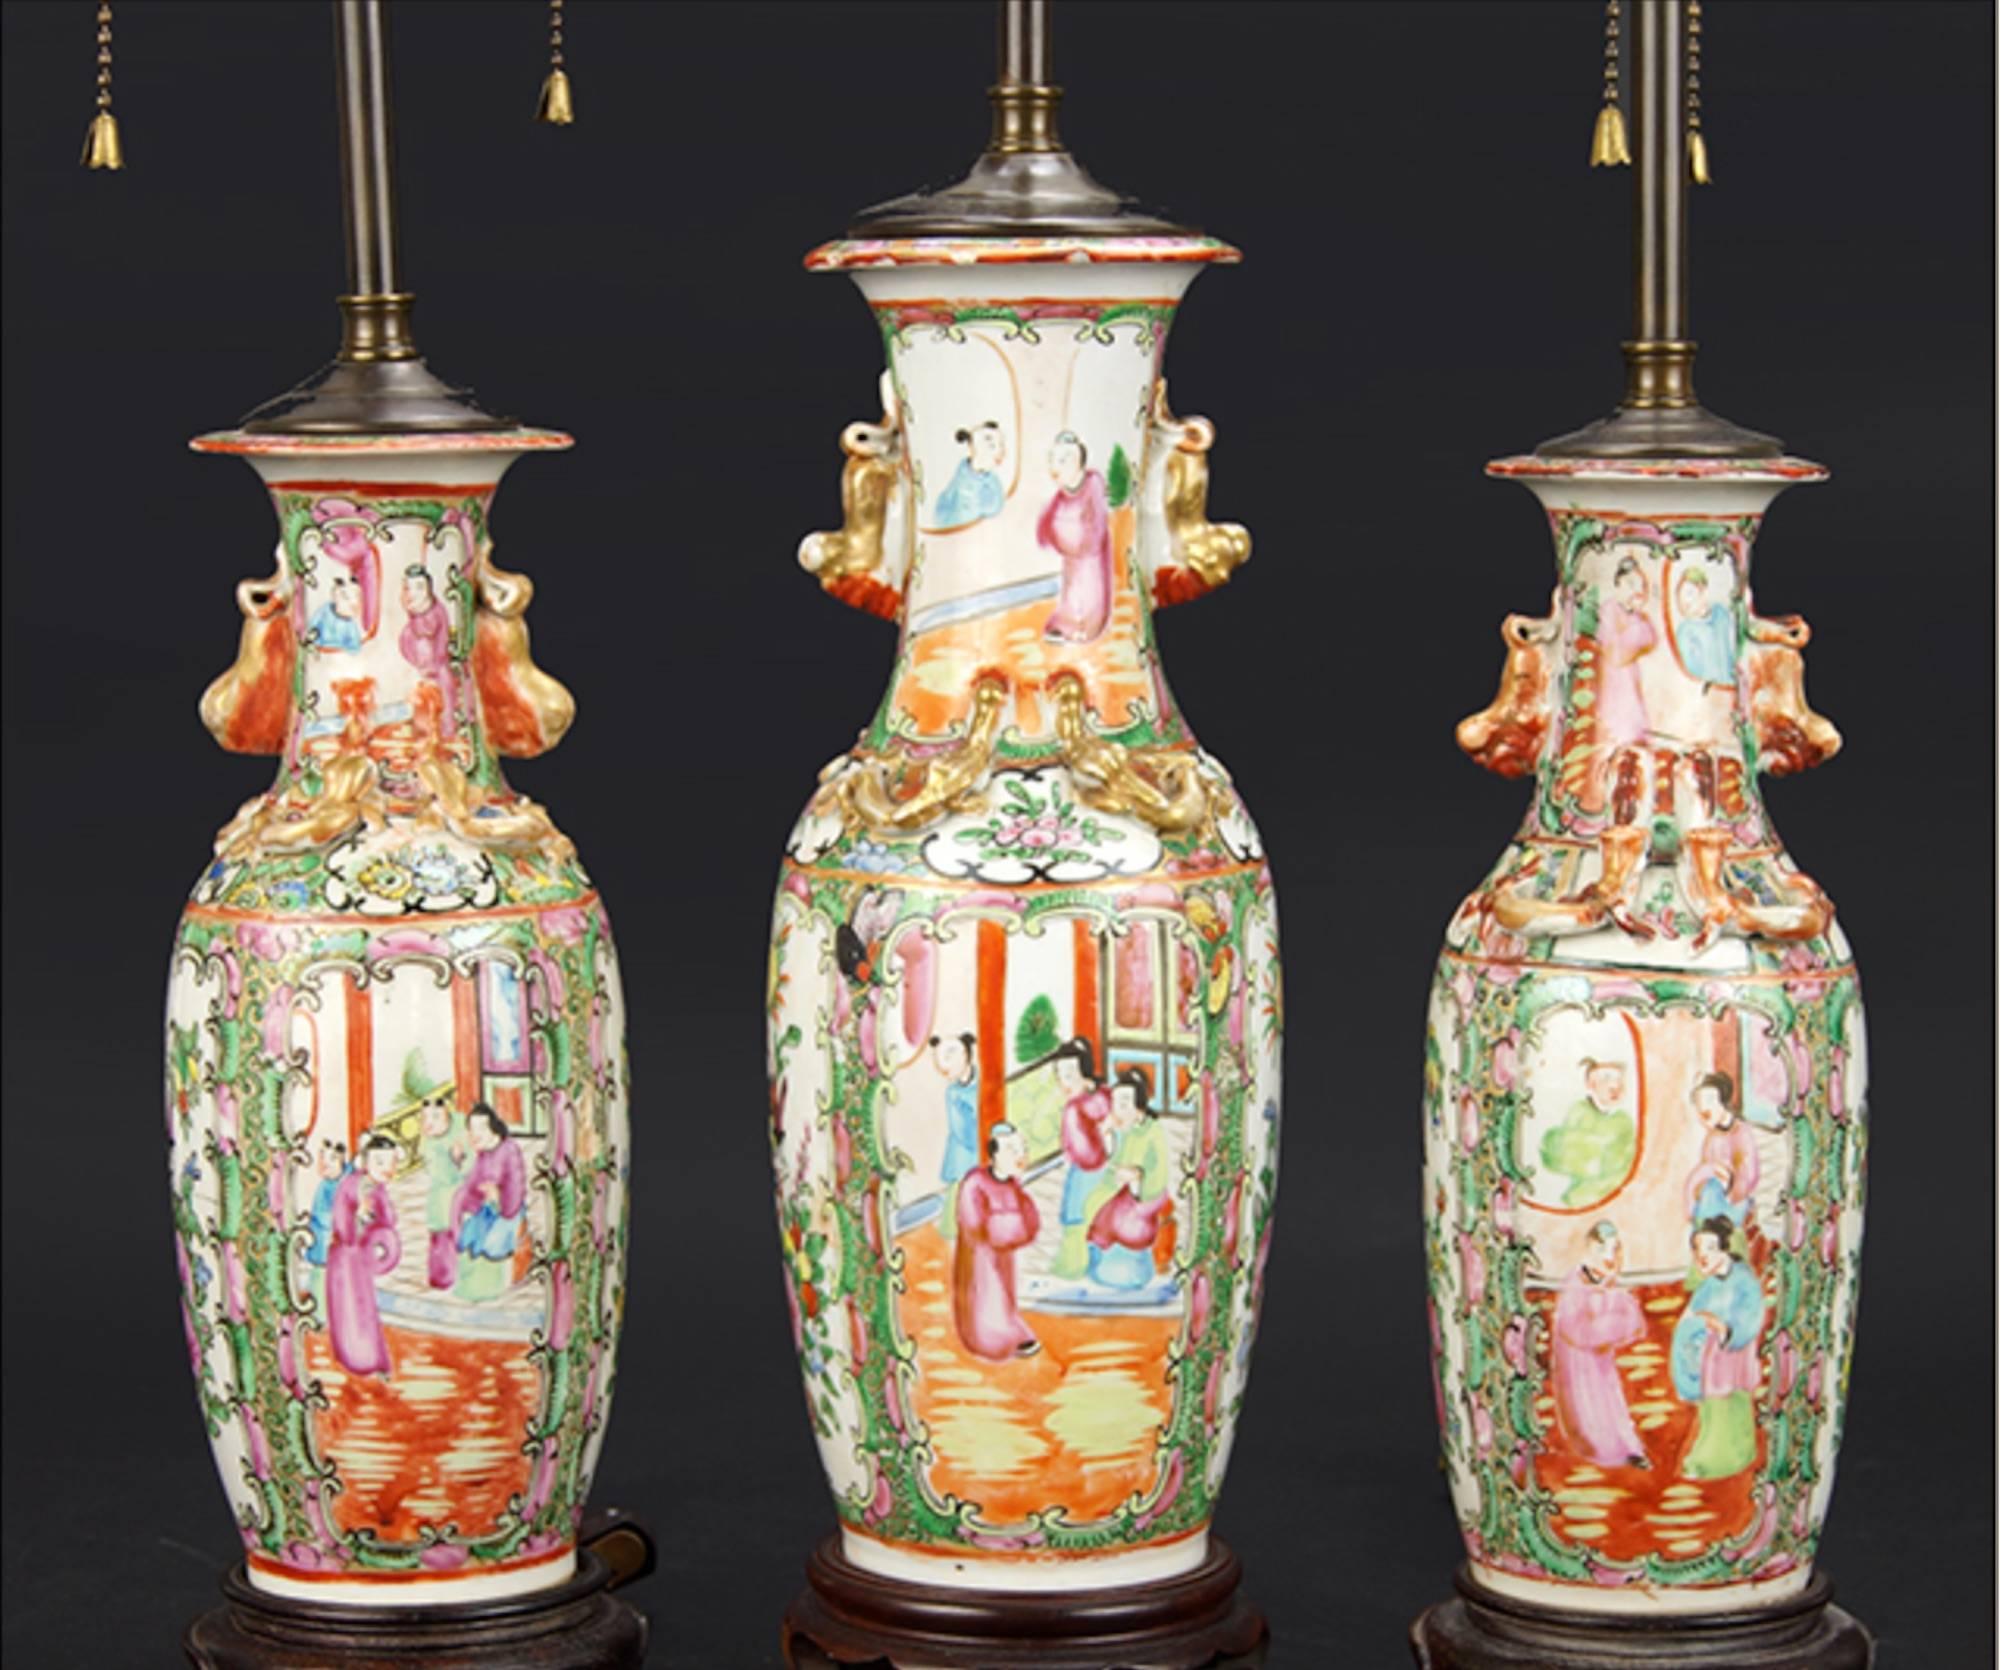 Three 19th Century Vases Mounted As Lamps.  We will divide the pair from the single.